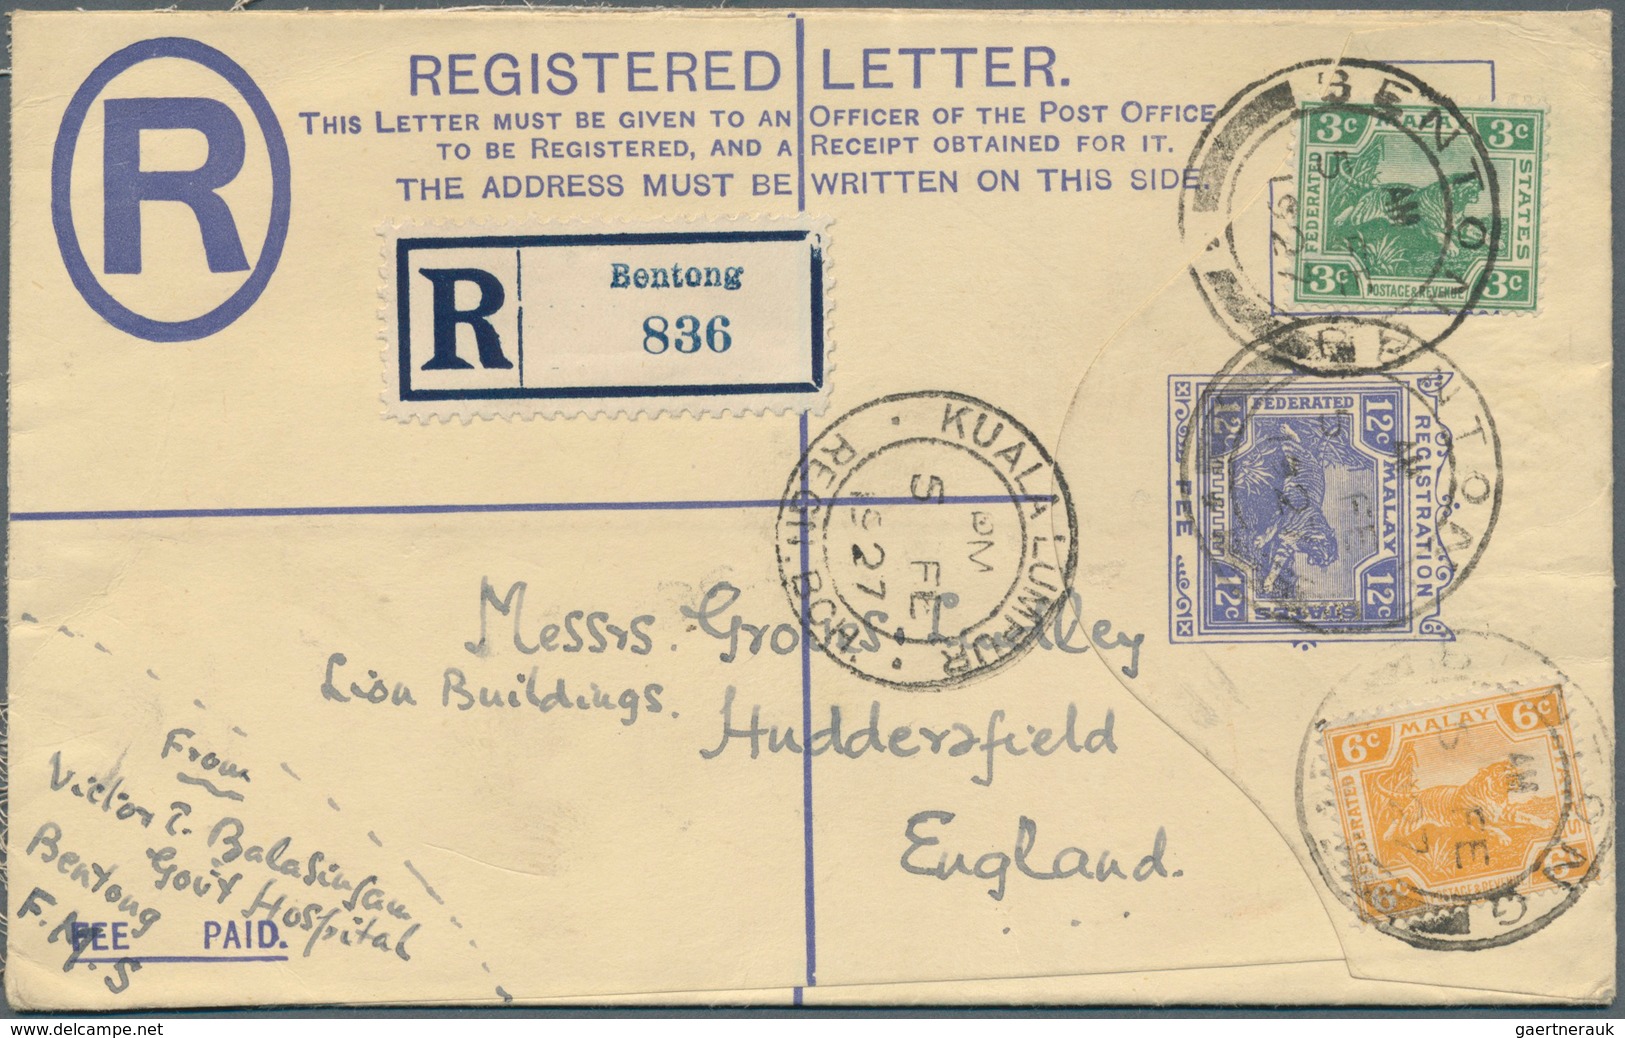 Malaiische Staaten - Pahang: 1927 (5/2): Bentong, FMS 15c Registered Envelope To England, Uprated Wi - Pahang